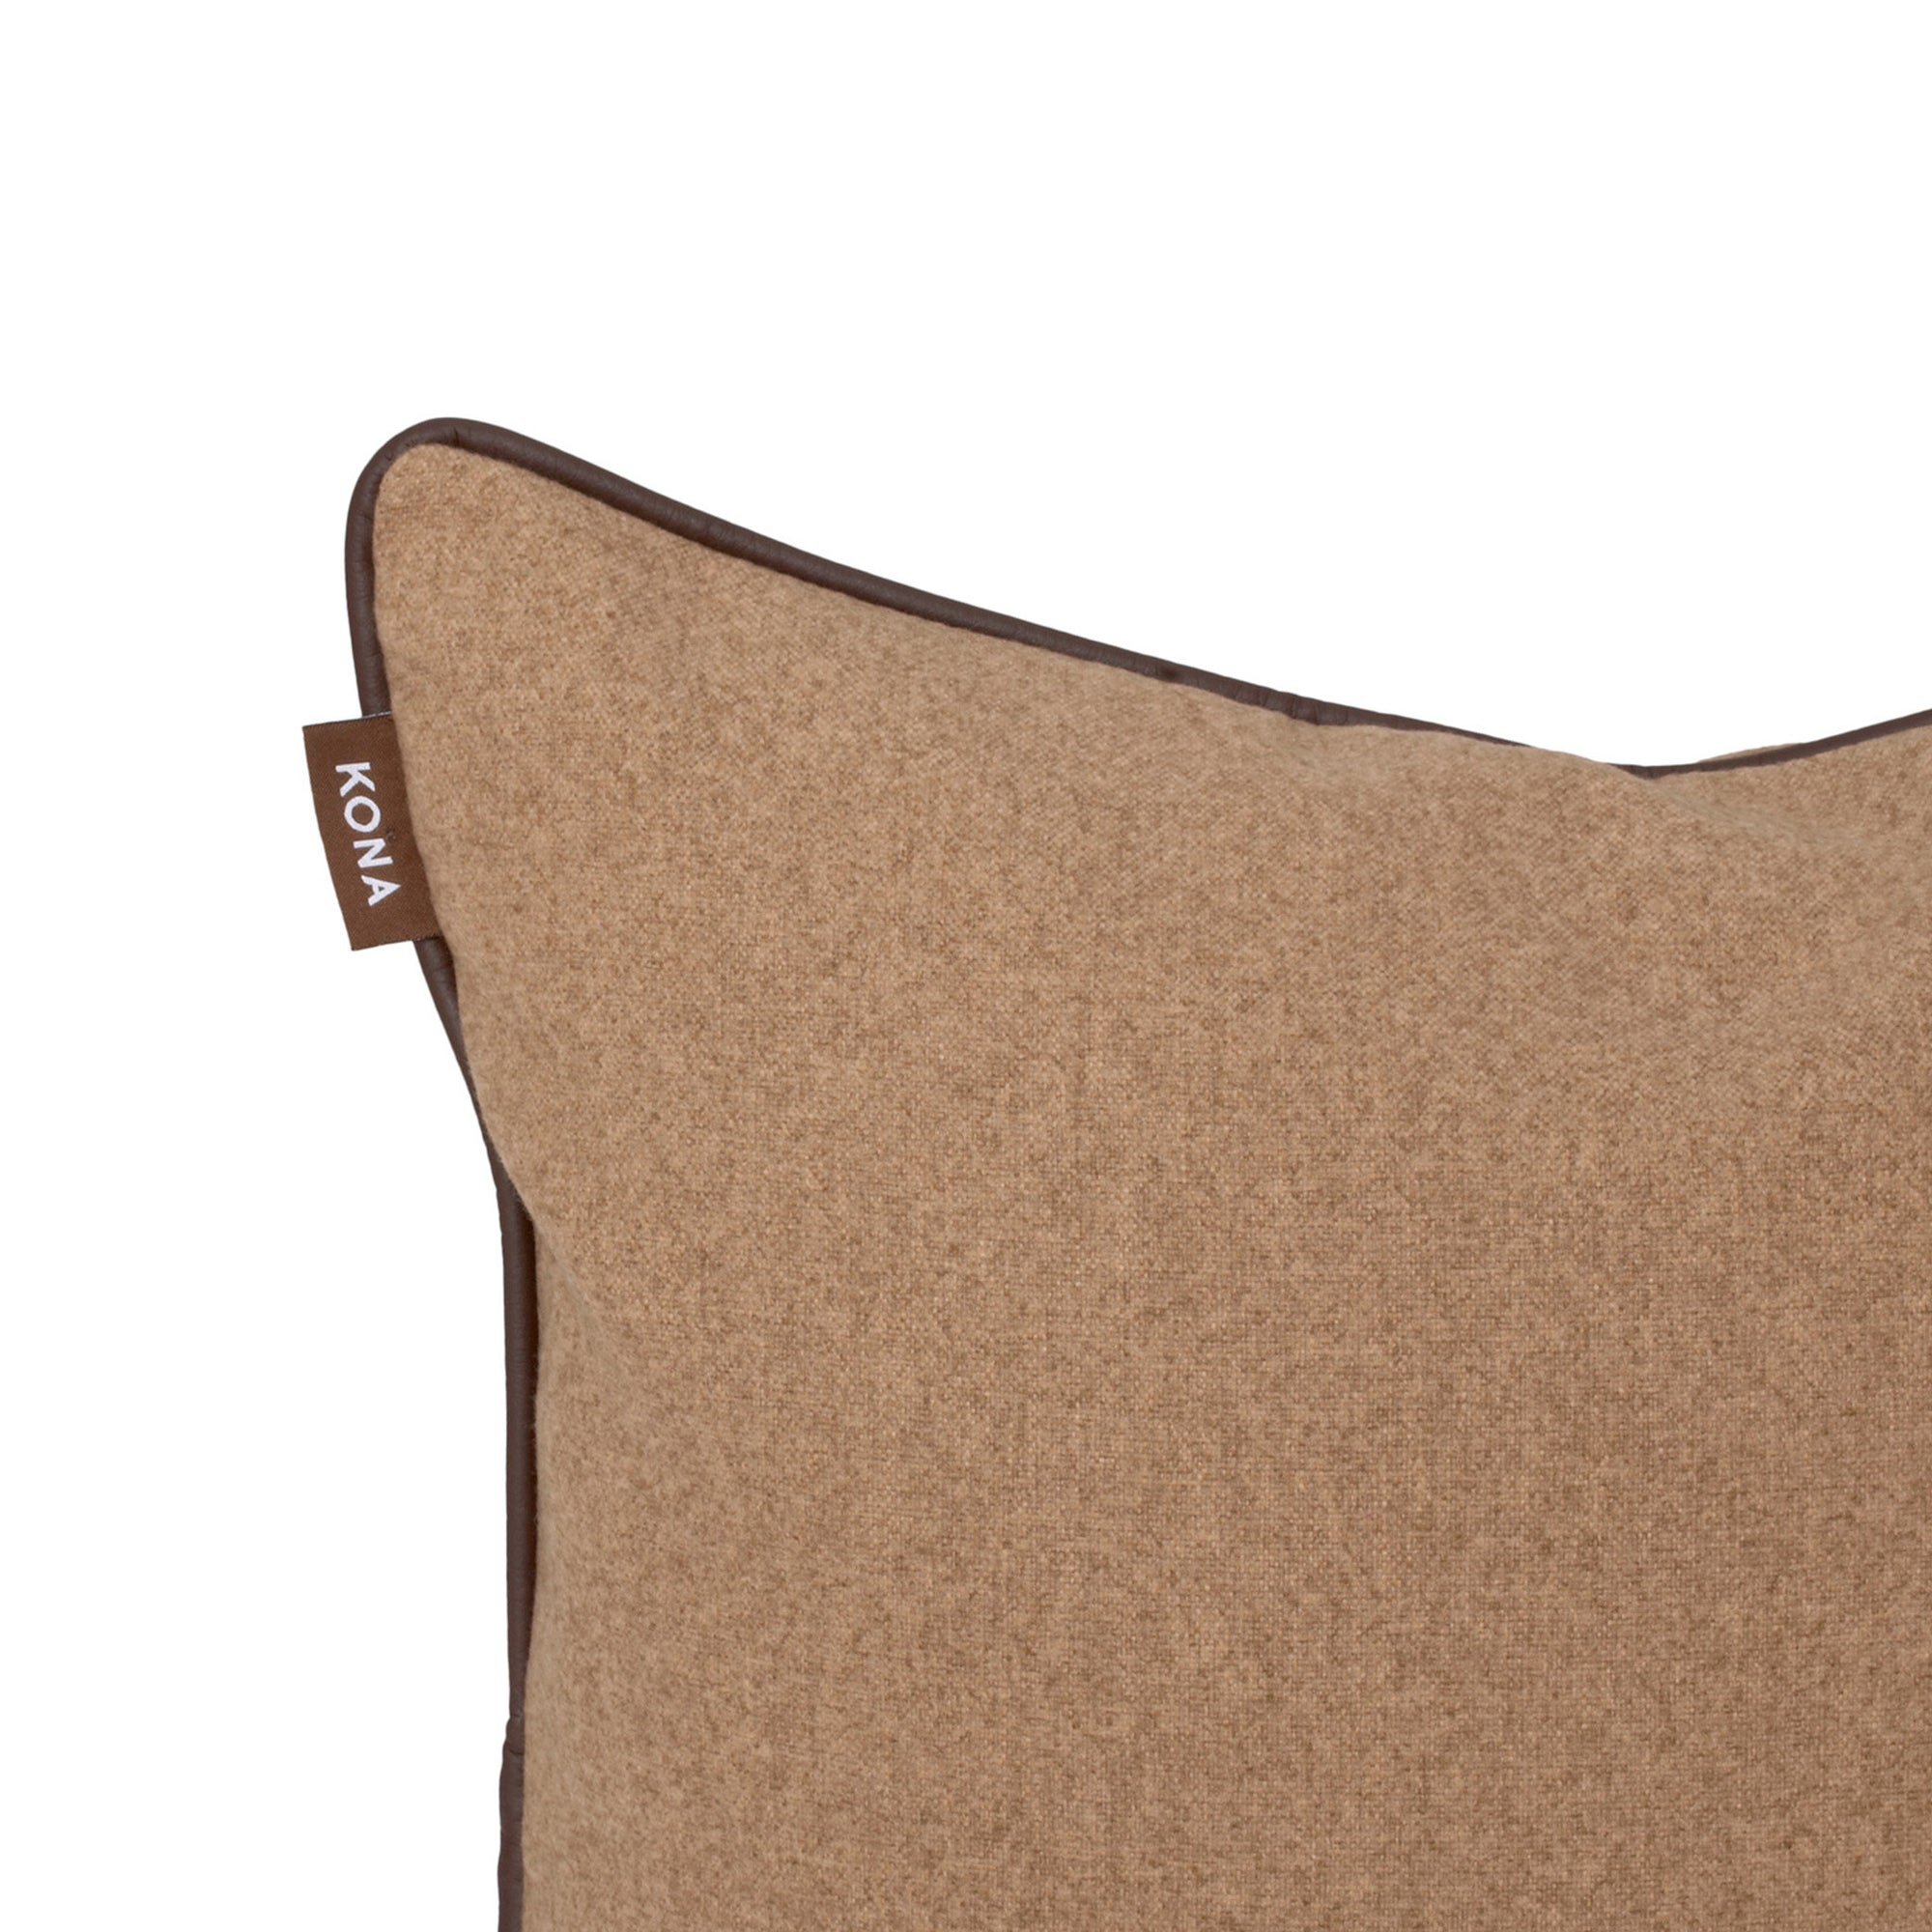 KONA CAVE® Decorative pillow covers, elegant light brown flannel with leather trim.